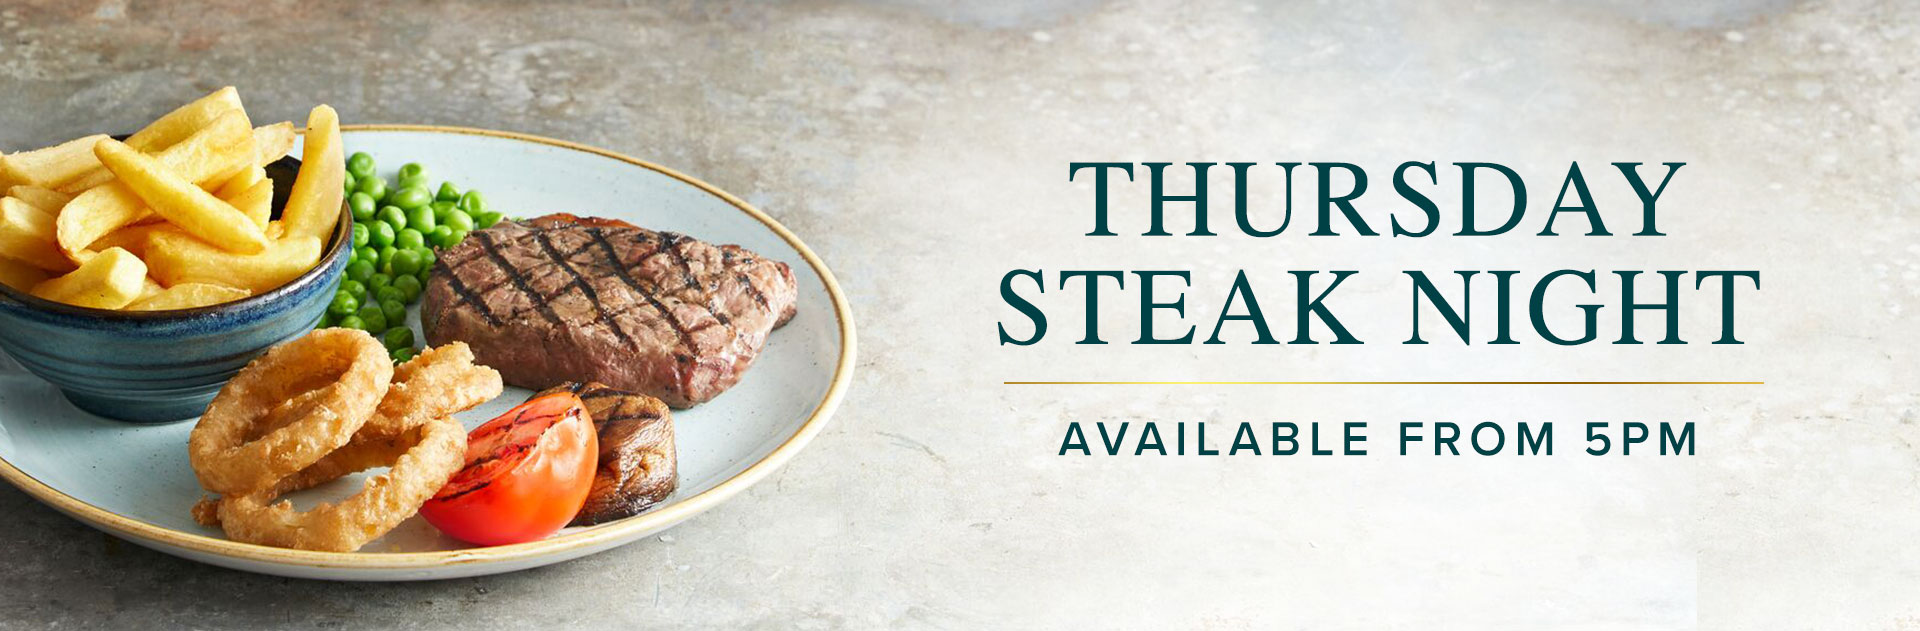 Thursday Steak Night at The Old Hare and Hounds